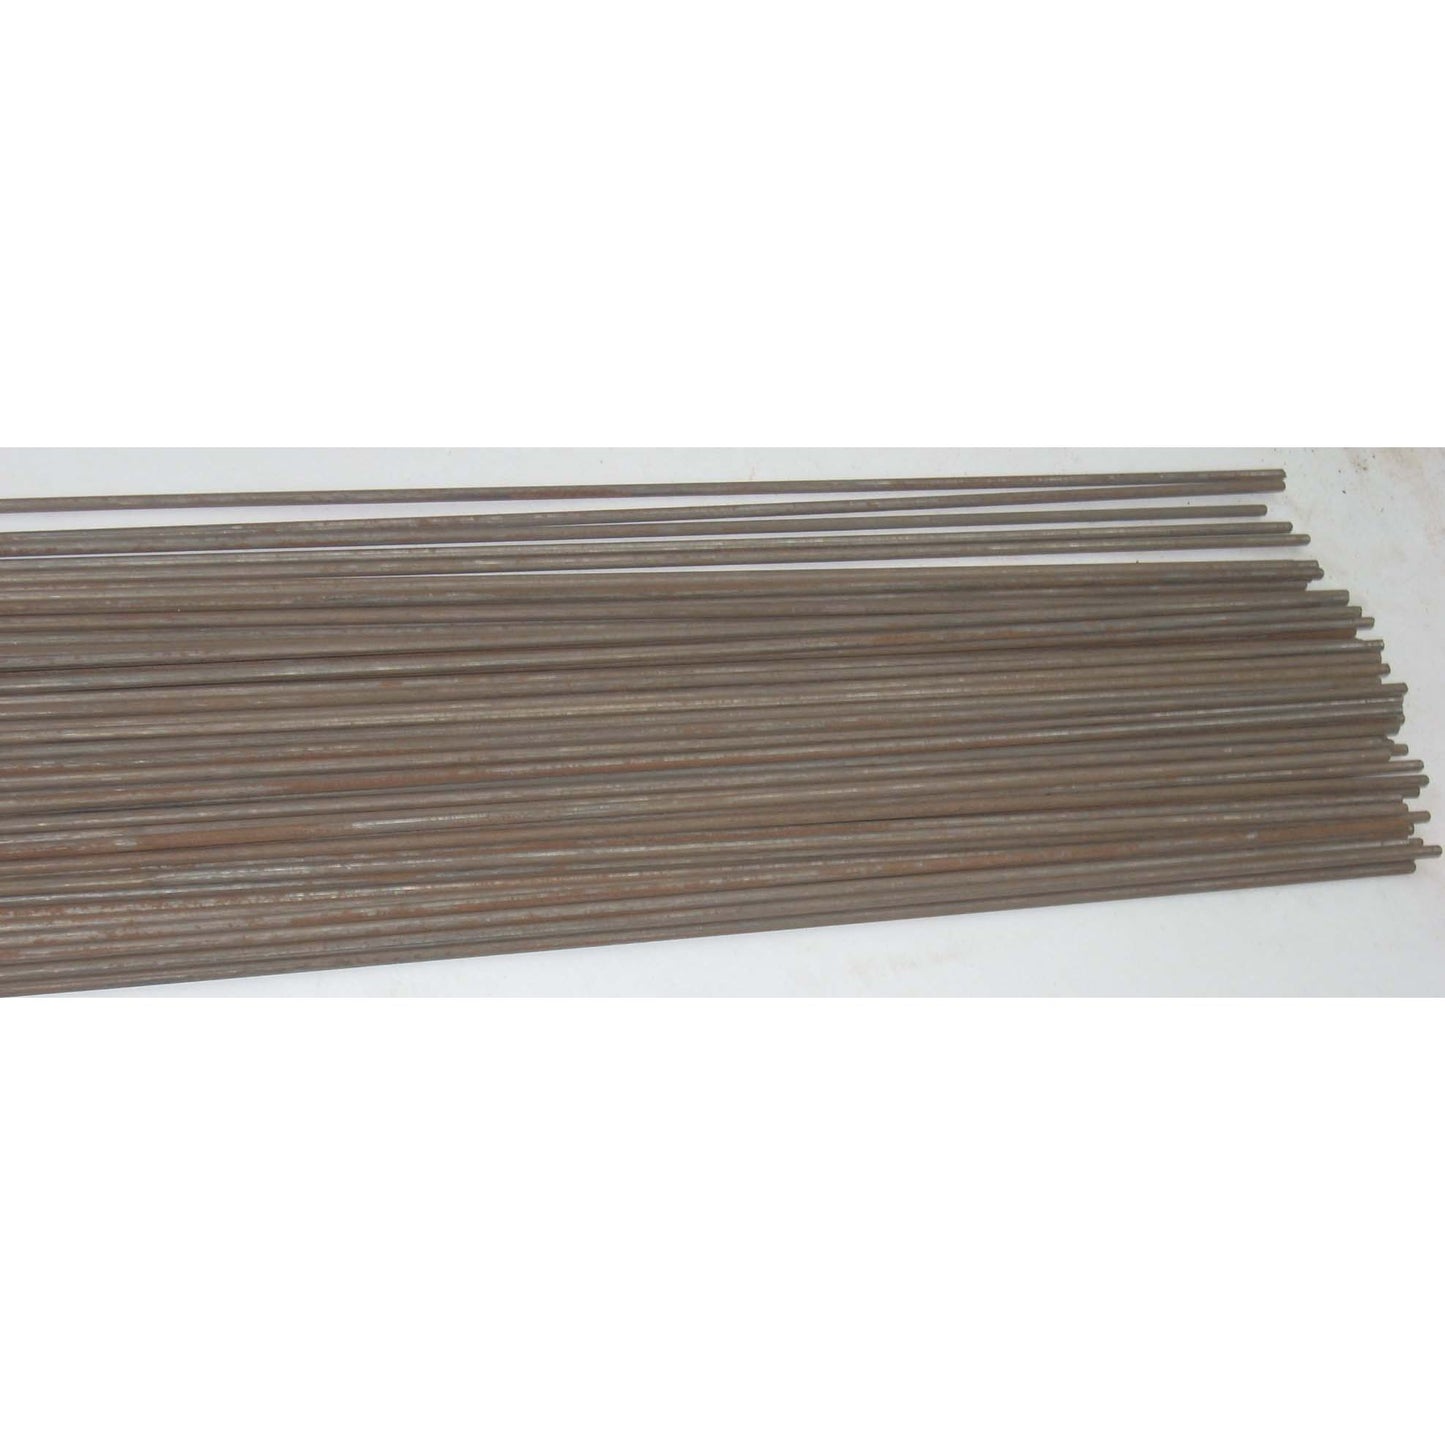 R60 Gas Brazing Rods 1/8 x 36 Uncoated 10 lbs - Some Rust